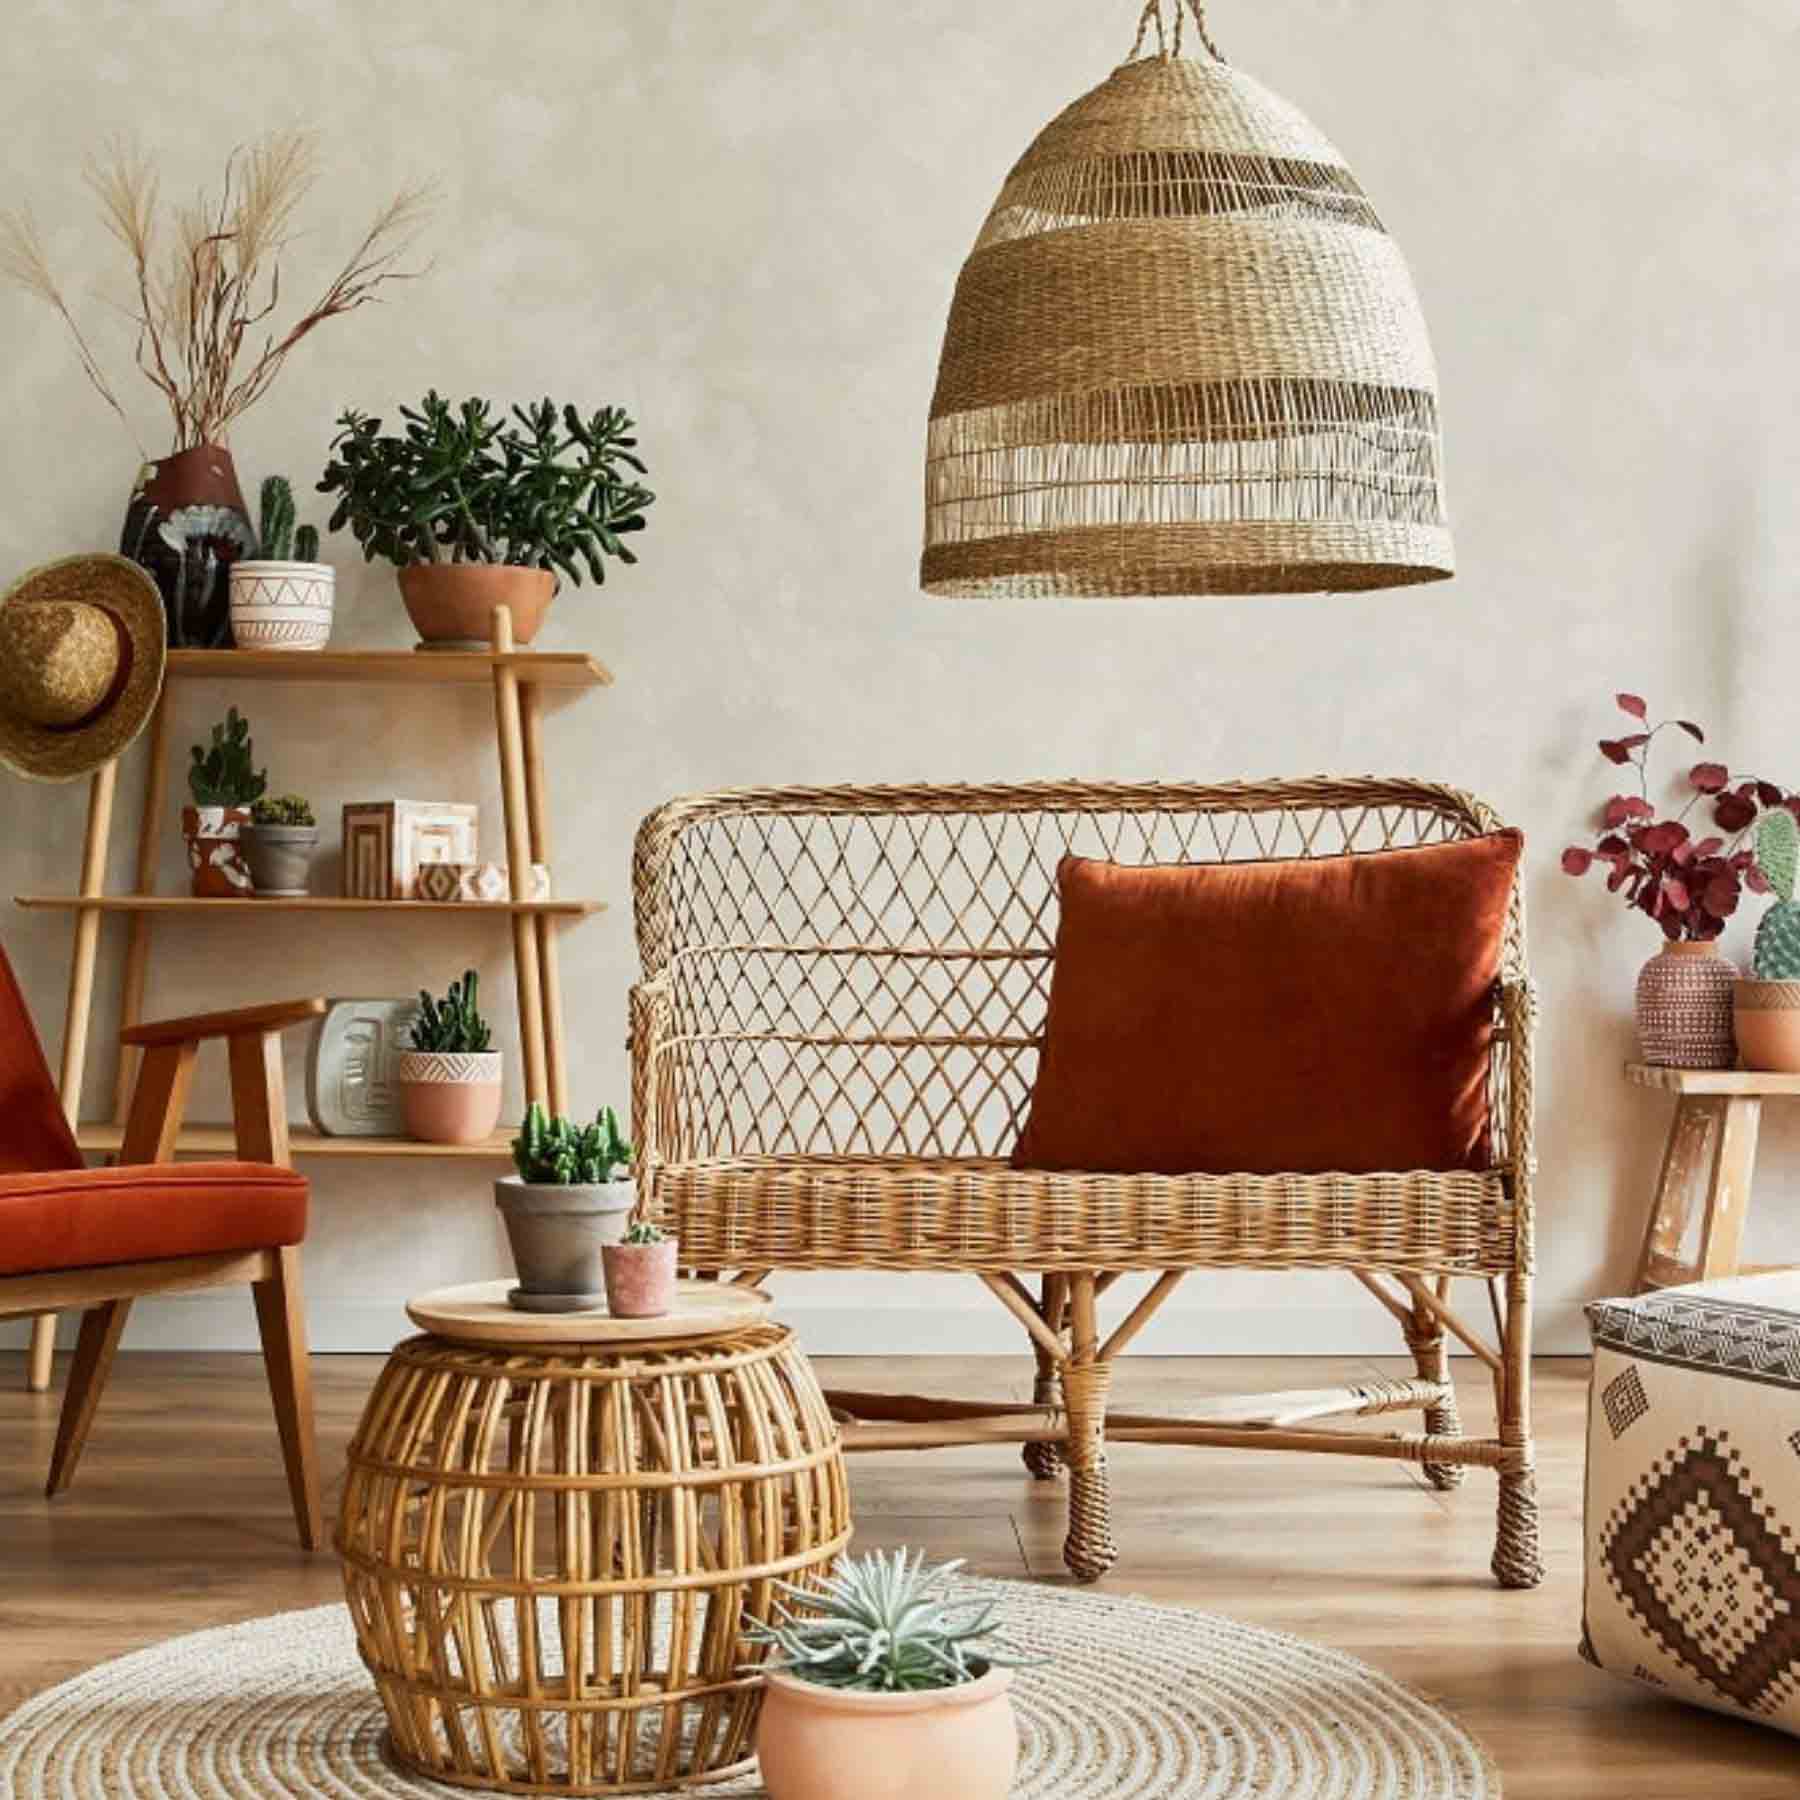 natural furniture completes the overall picture of the tropical style